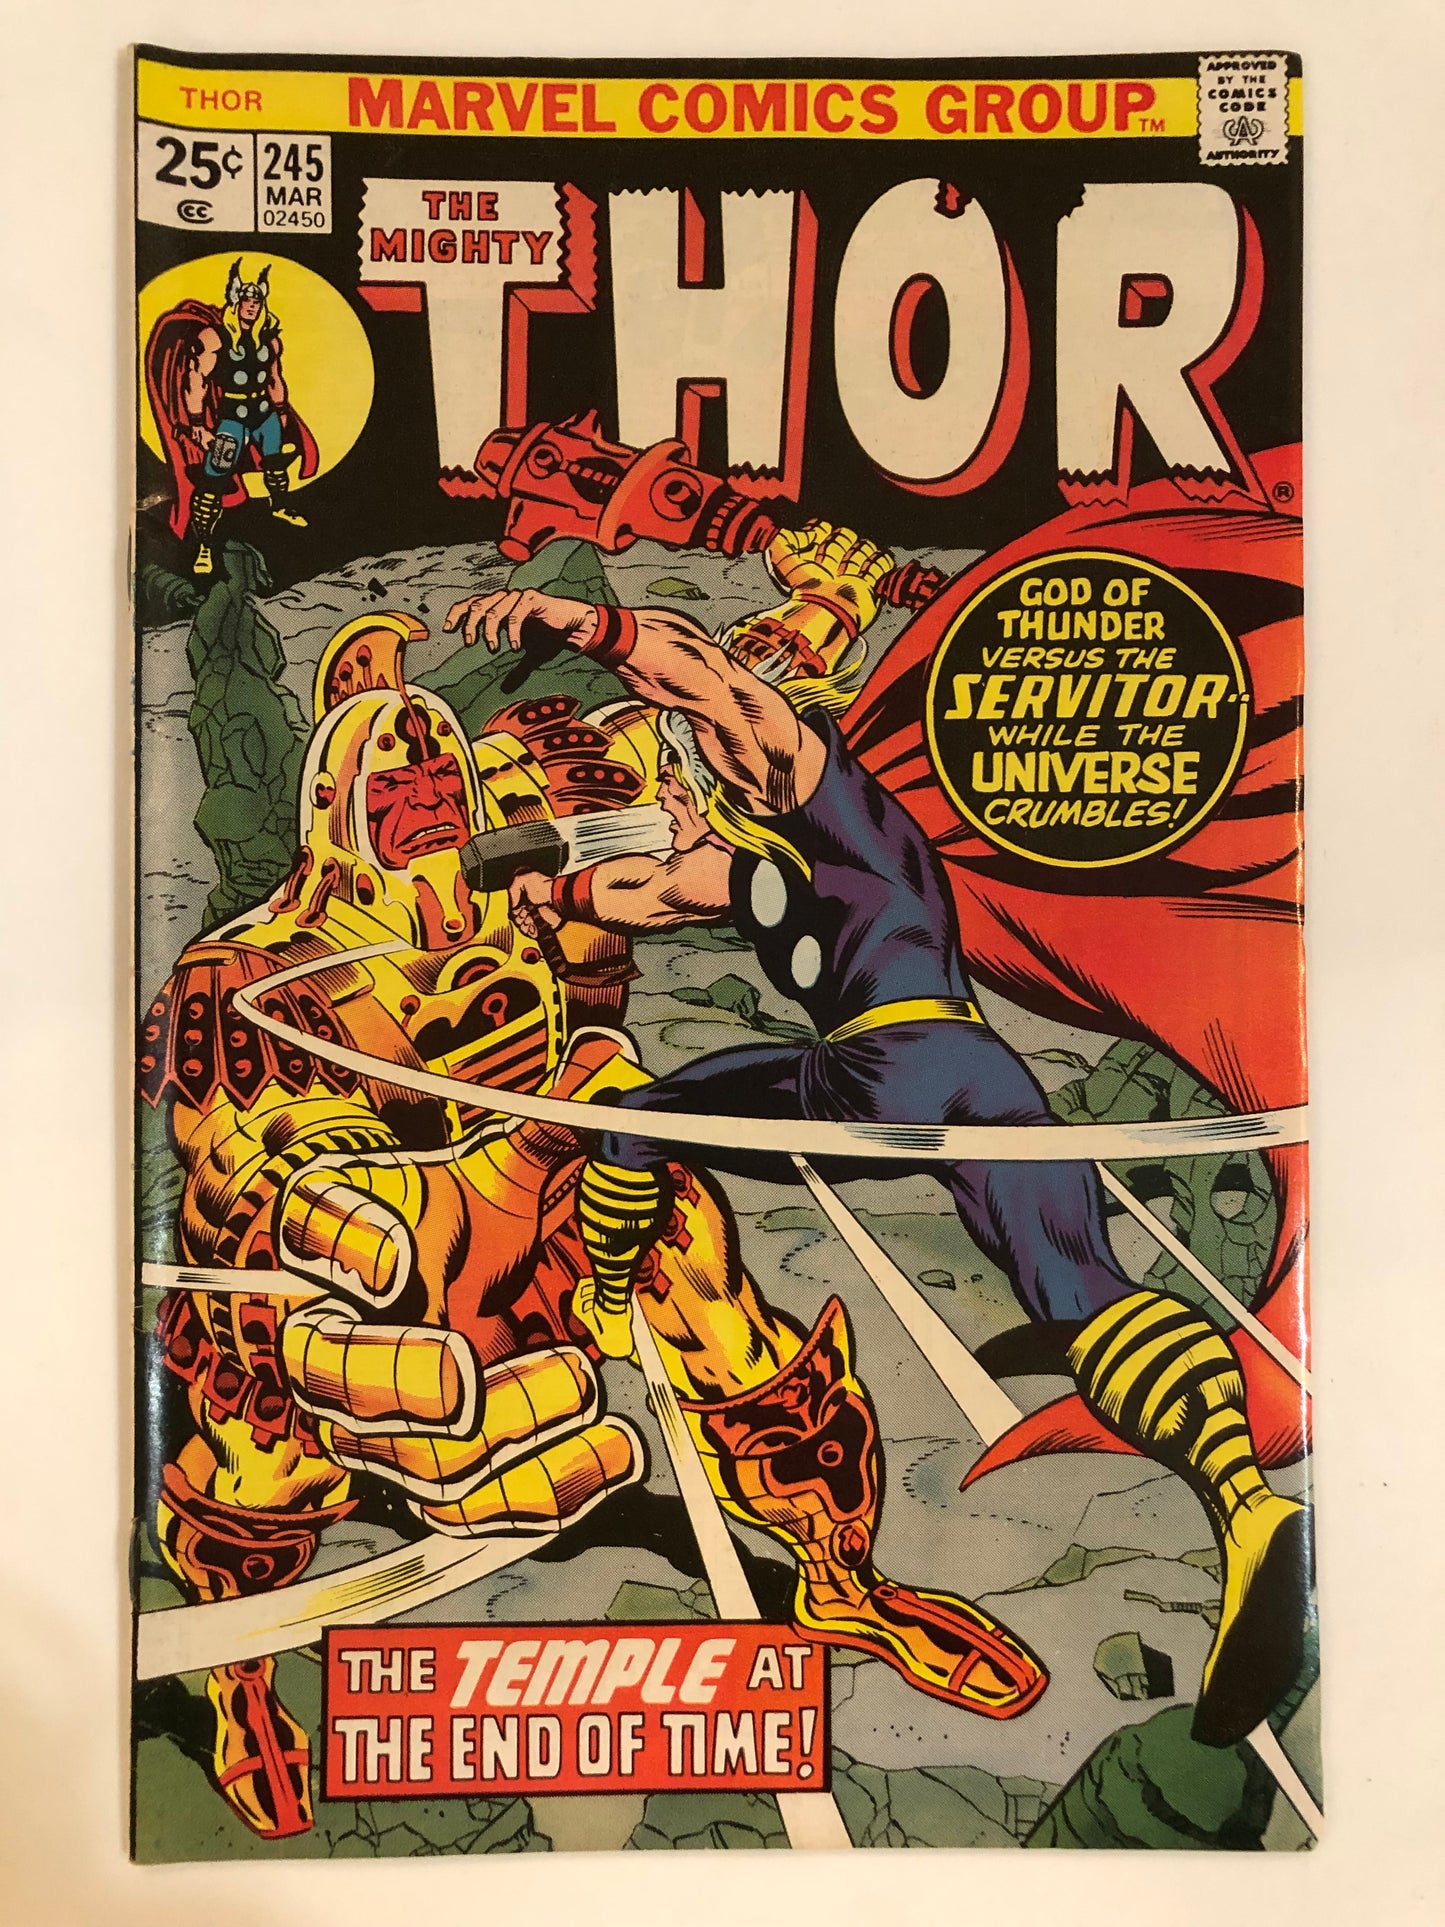 The Mighty Thor #245